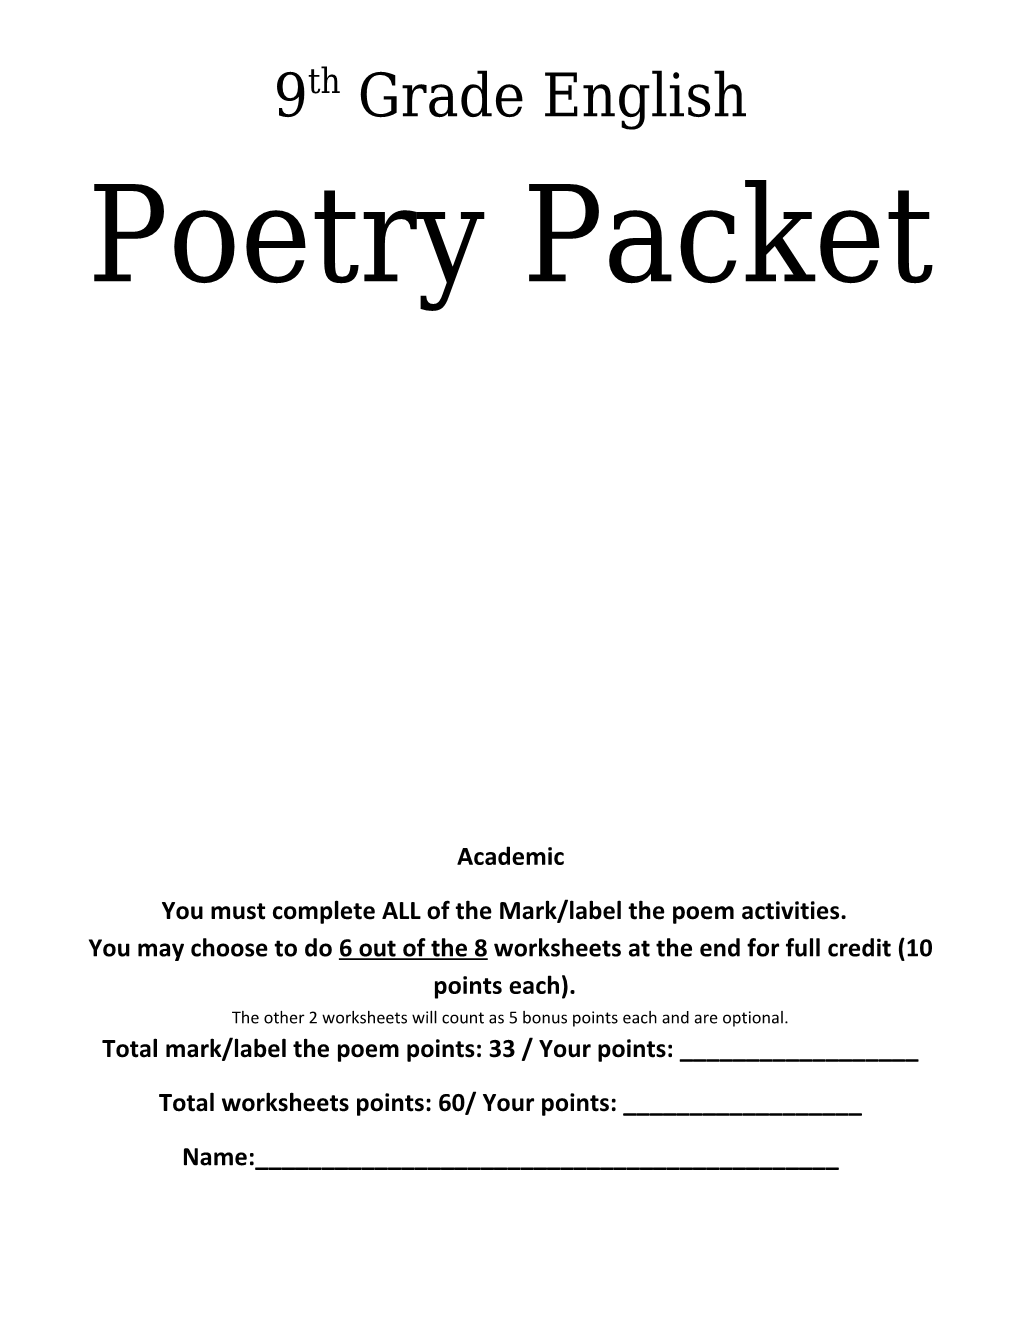 You Must Complete ALL of the Mark/Label the Poem Activities